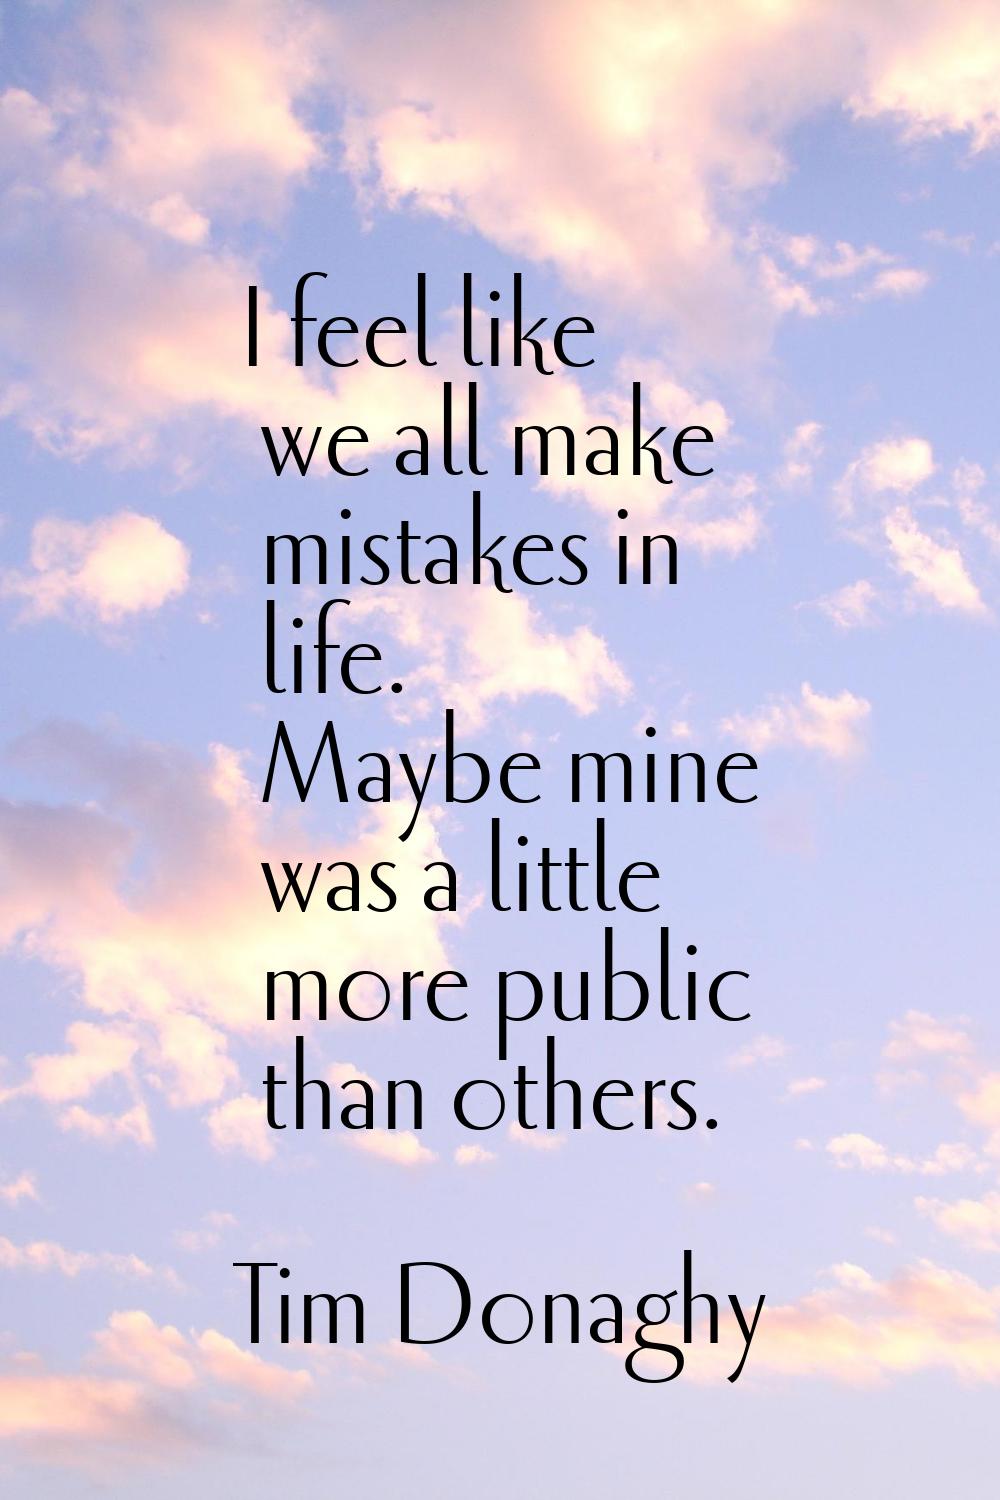 I feel like we all make mistakes in life. Maybe mine was a little more public than others.